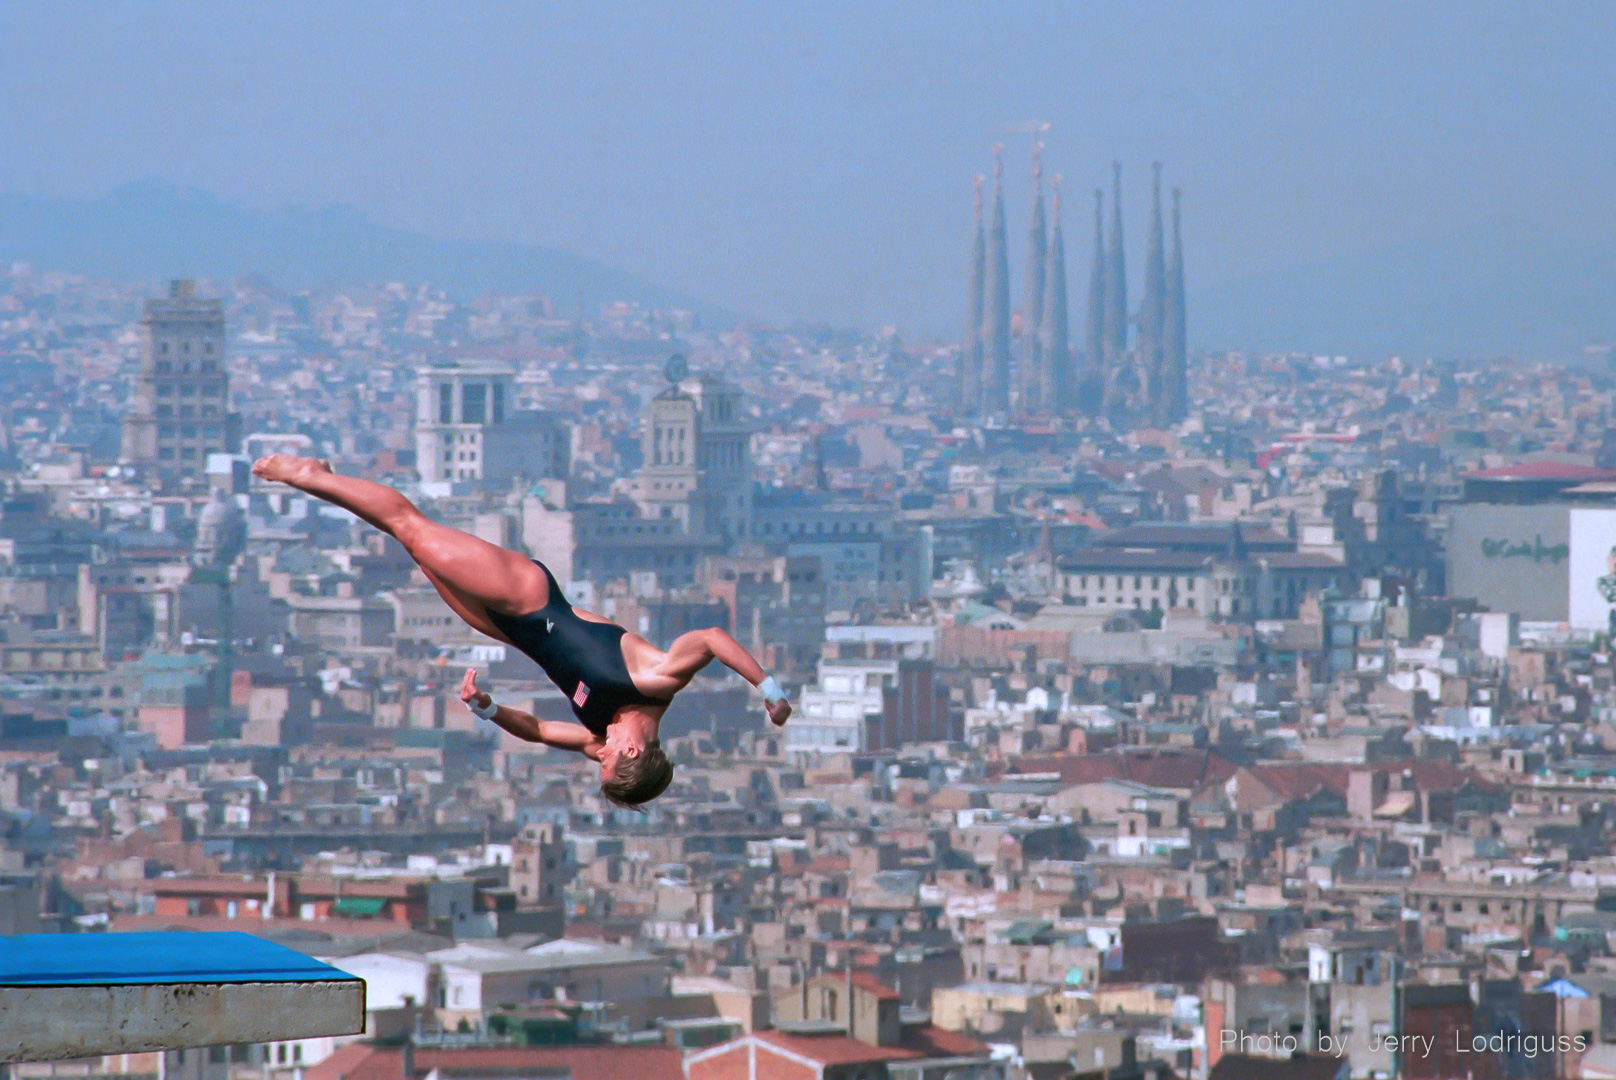 With a spectacular view of the city of Barcelona in the background, 29 year-old Mary Ellen Clark of Newtown Square, Pa., wins a bronze medal on her final dive in the women's 10 meter platform competition during the 1992 Olympic Games.